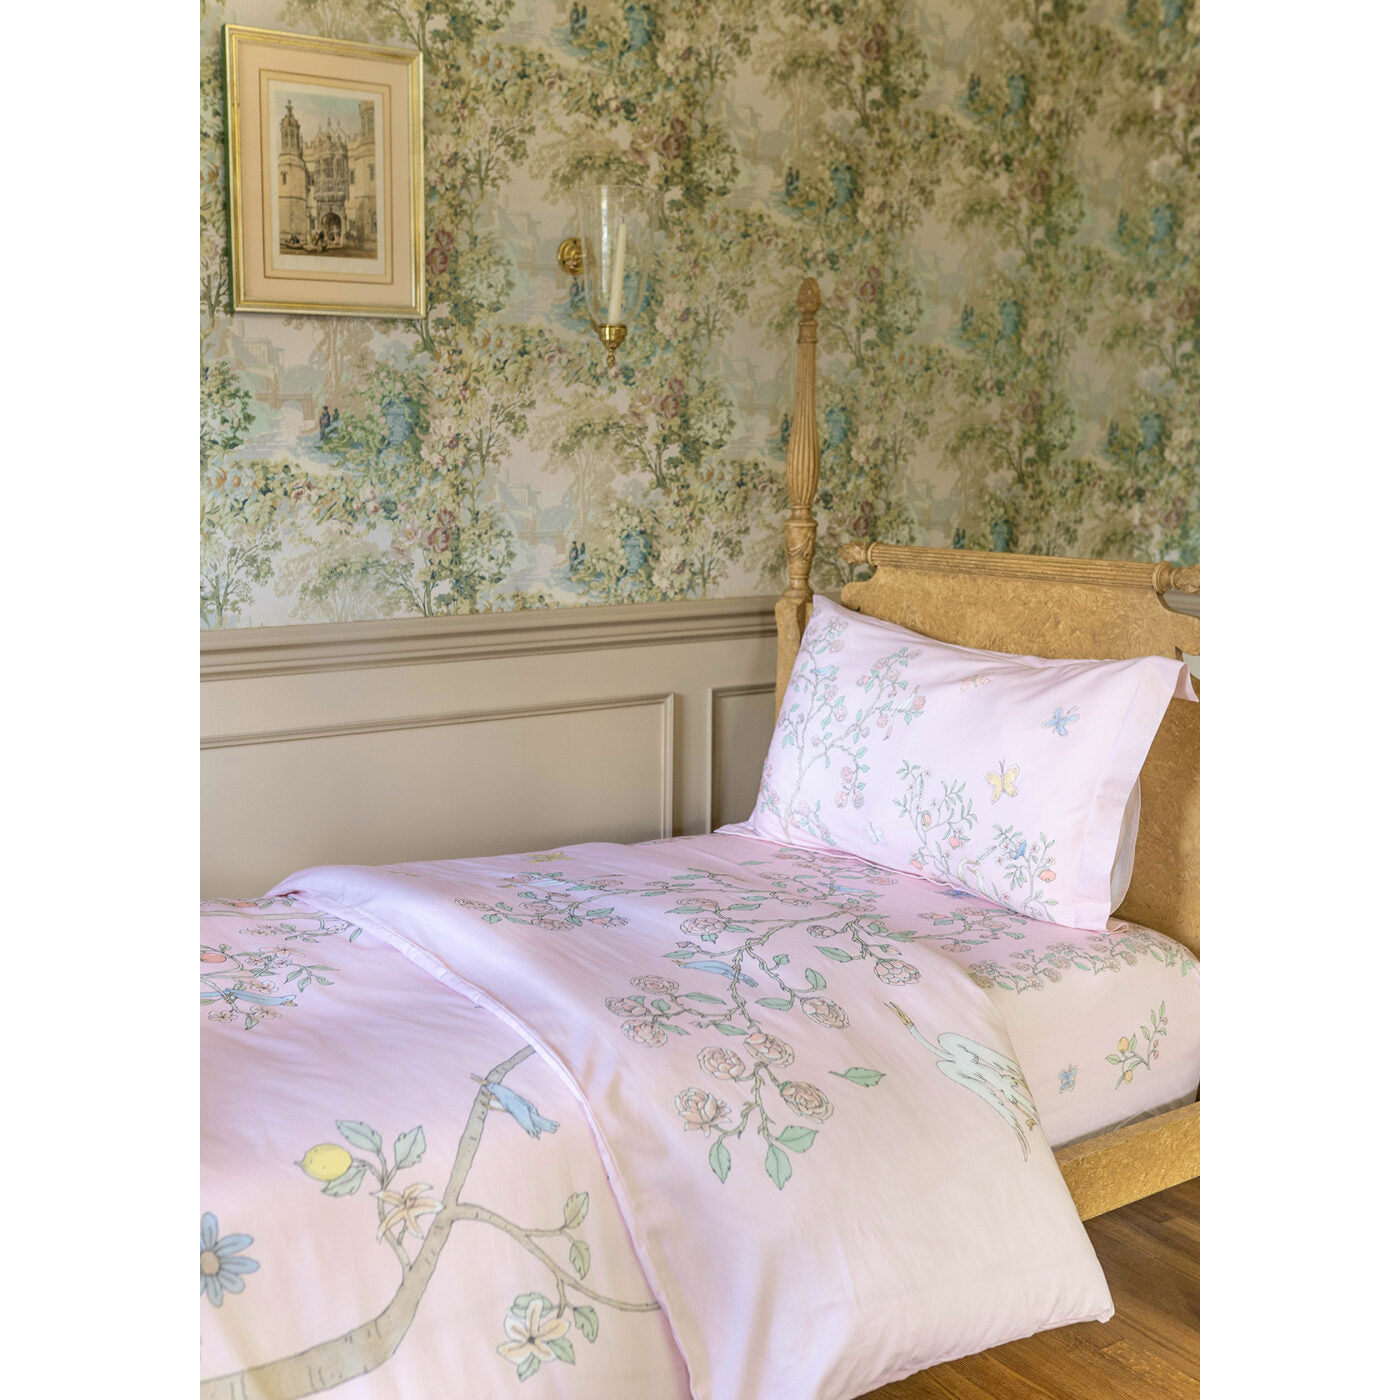 atelier-choux-single-bed-pillow-cover-in-bloom-pink-atel-1181277